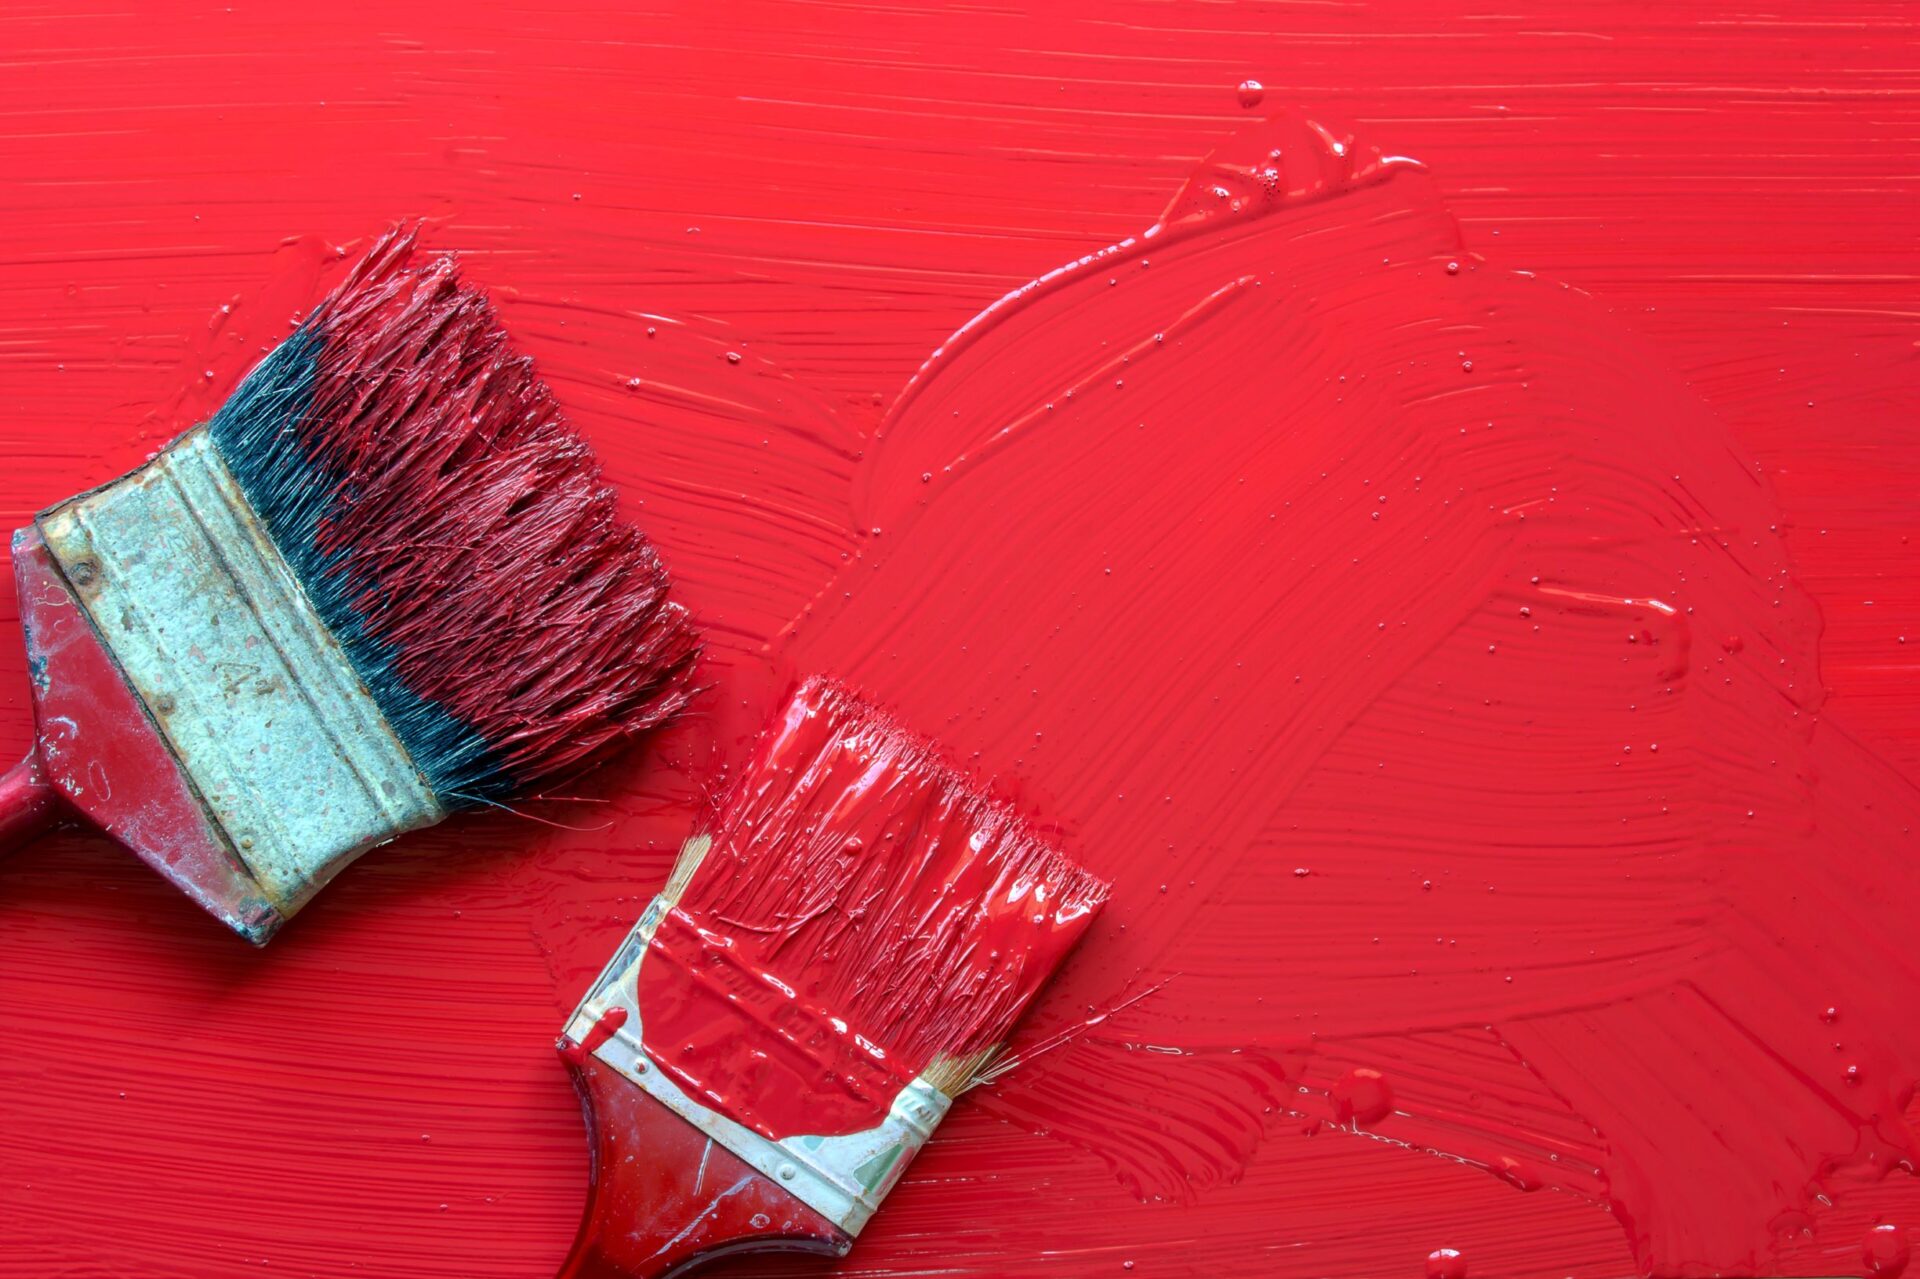 Painting your house? Check out these finishes